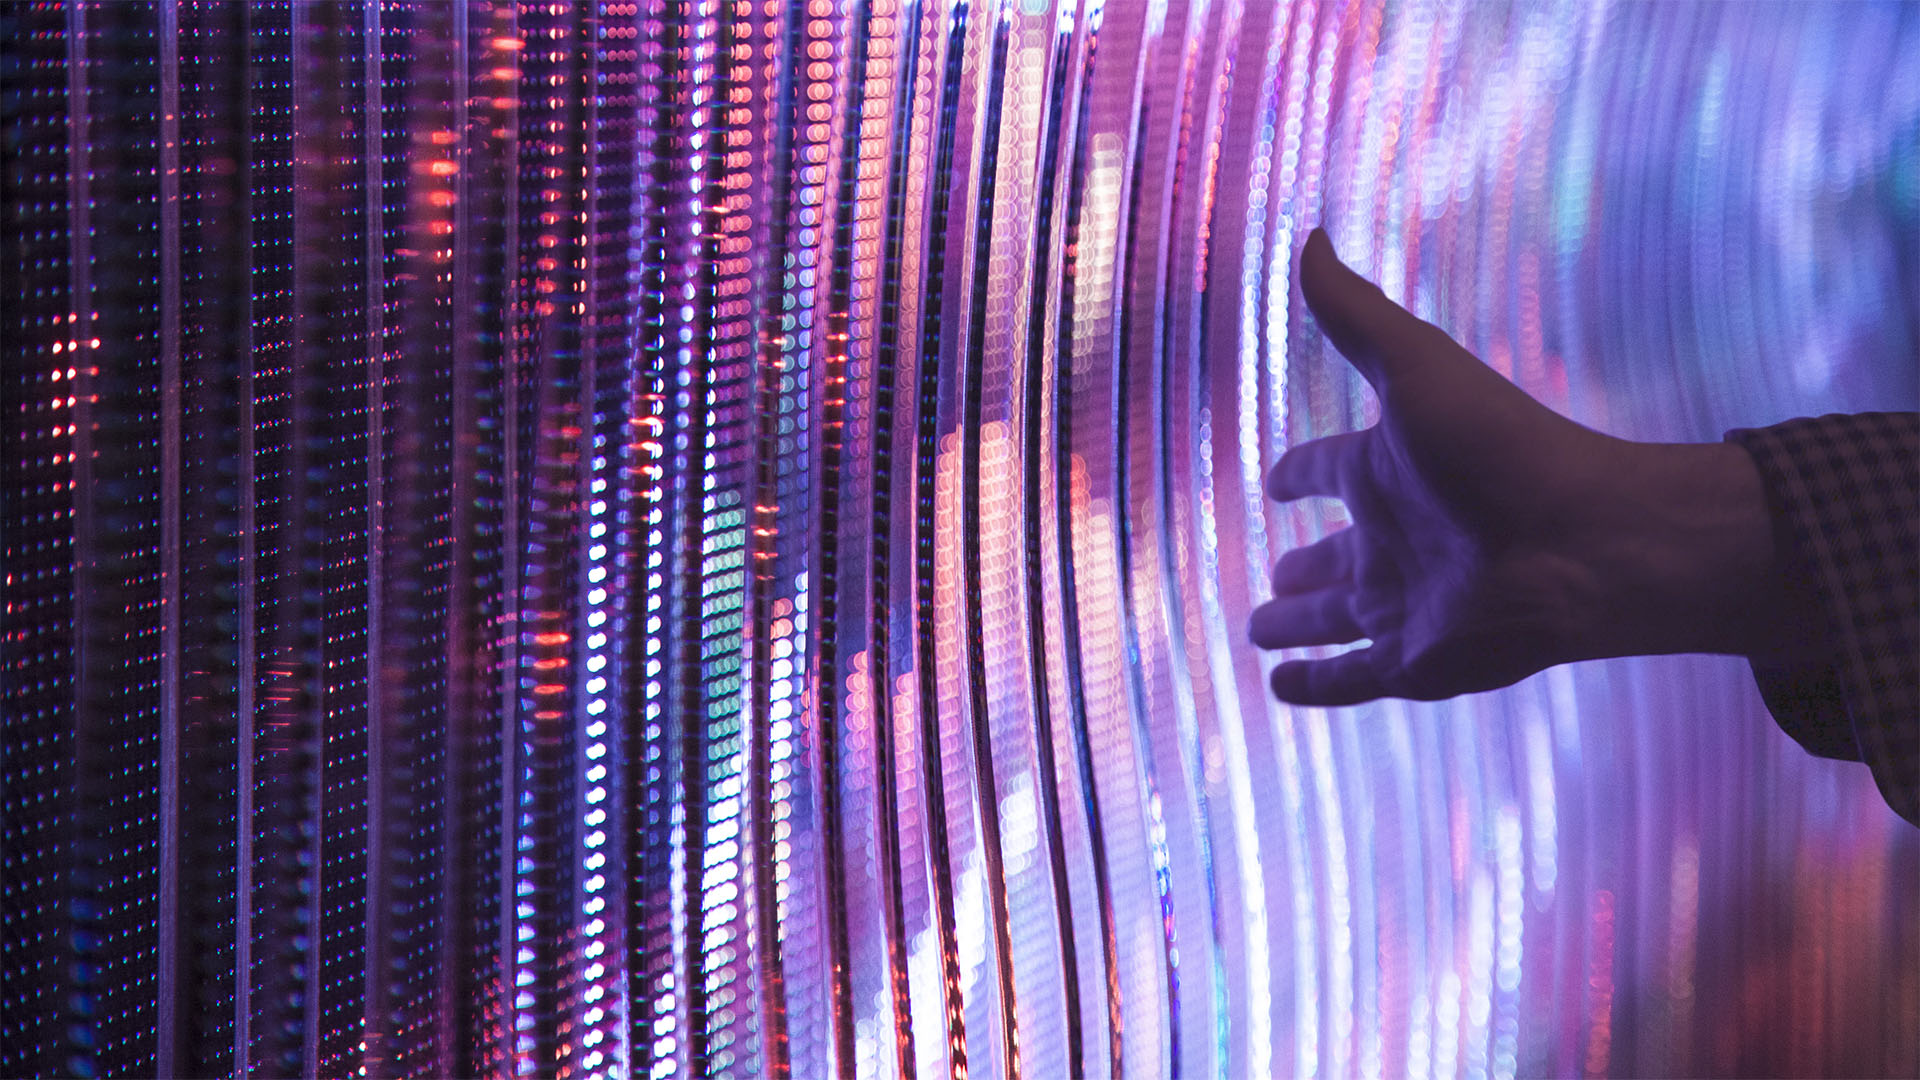 The Expression Wall, an interactive art installation, features an LED screen, a touch-sensitive plane, and custom acrylic panels. The image captures a hand making contact with the panels, sparking the creation of vibrant graphics.